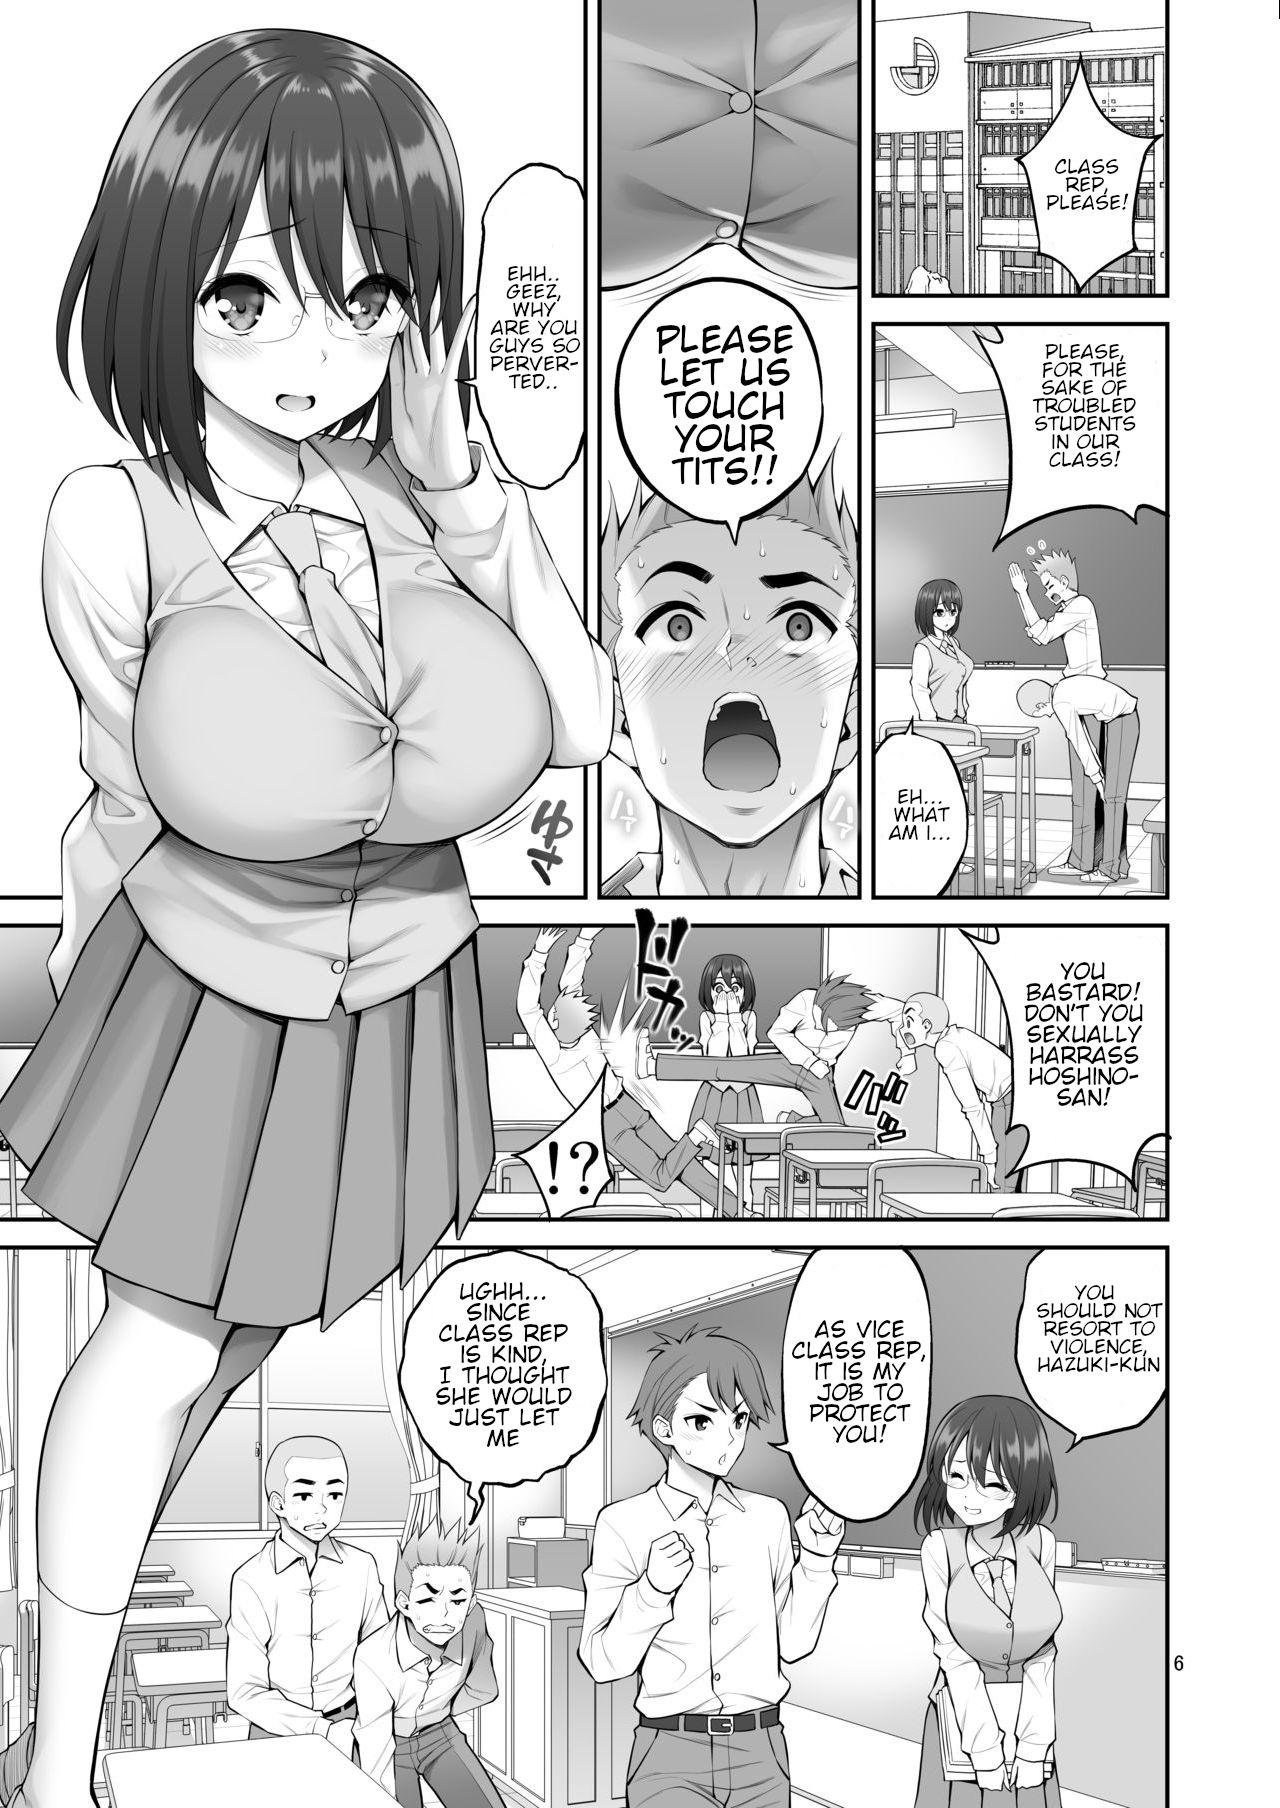 Bubble Free Oppai | Free Boobs - Original Ejaculation - Page 6